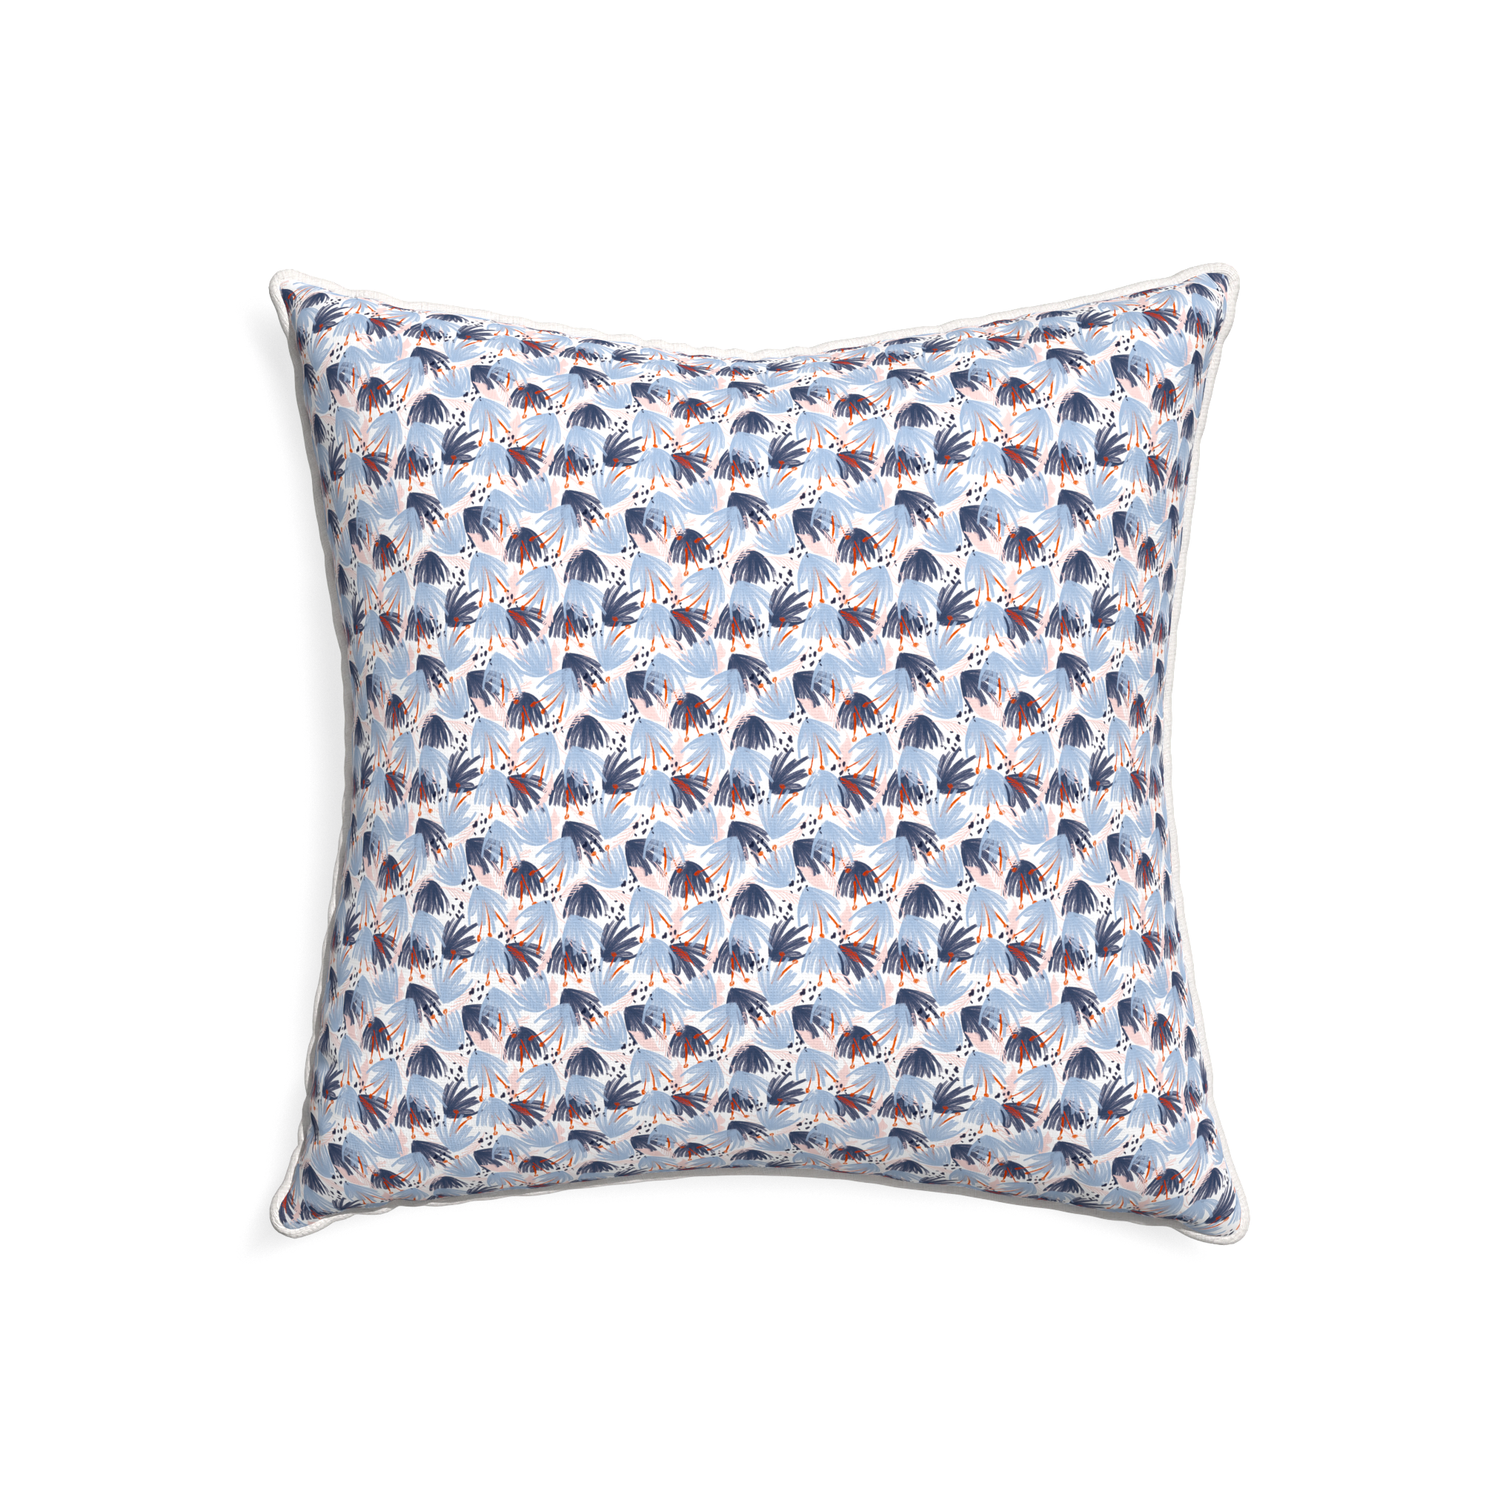 22-square eden blue custom pillow with snow piping on white background